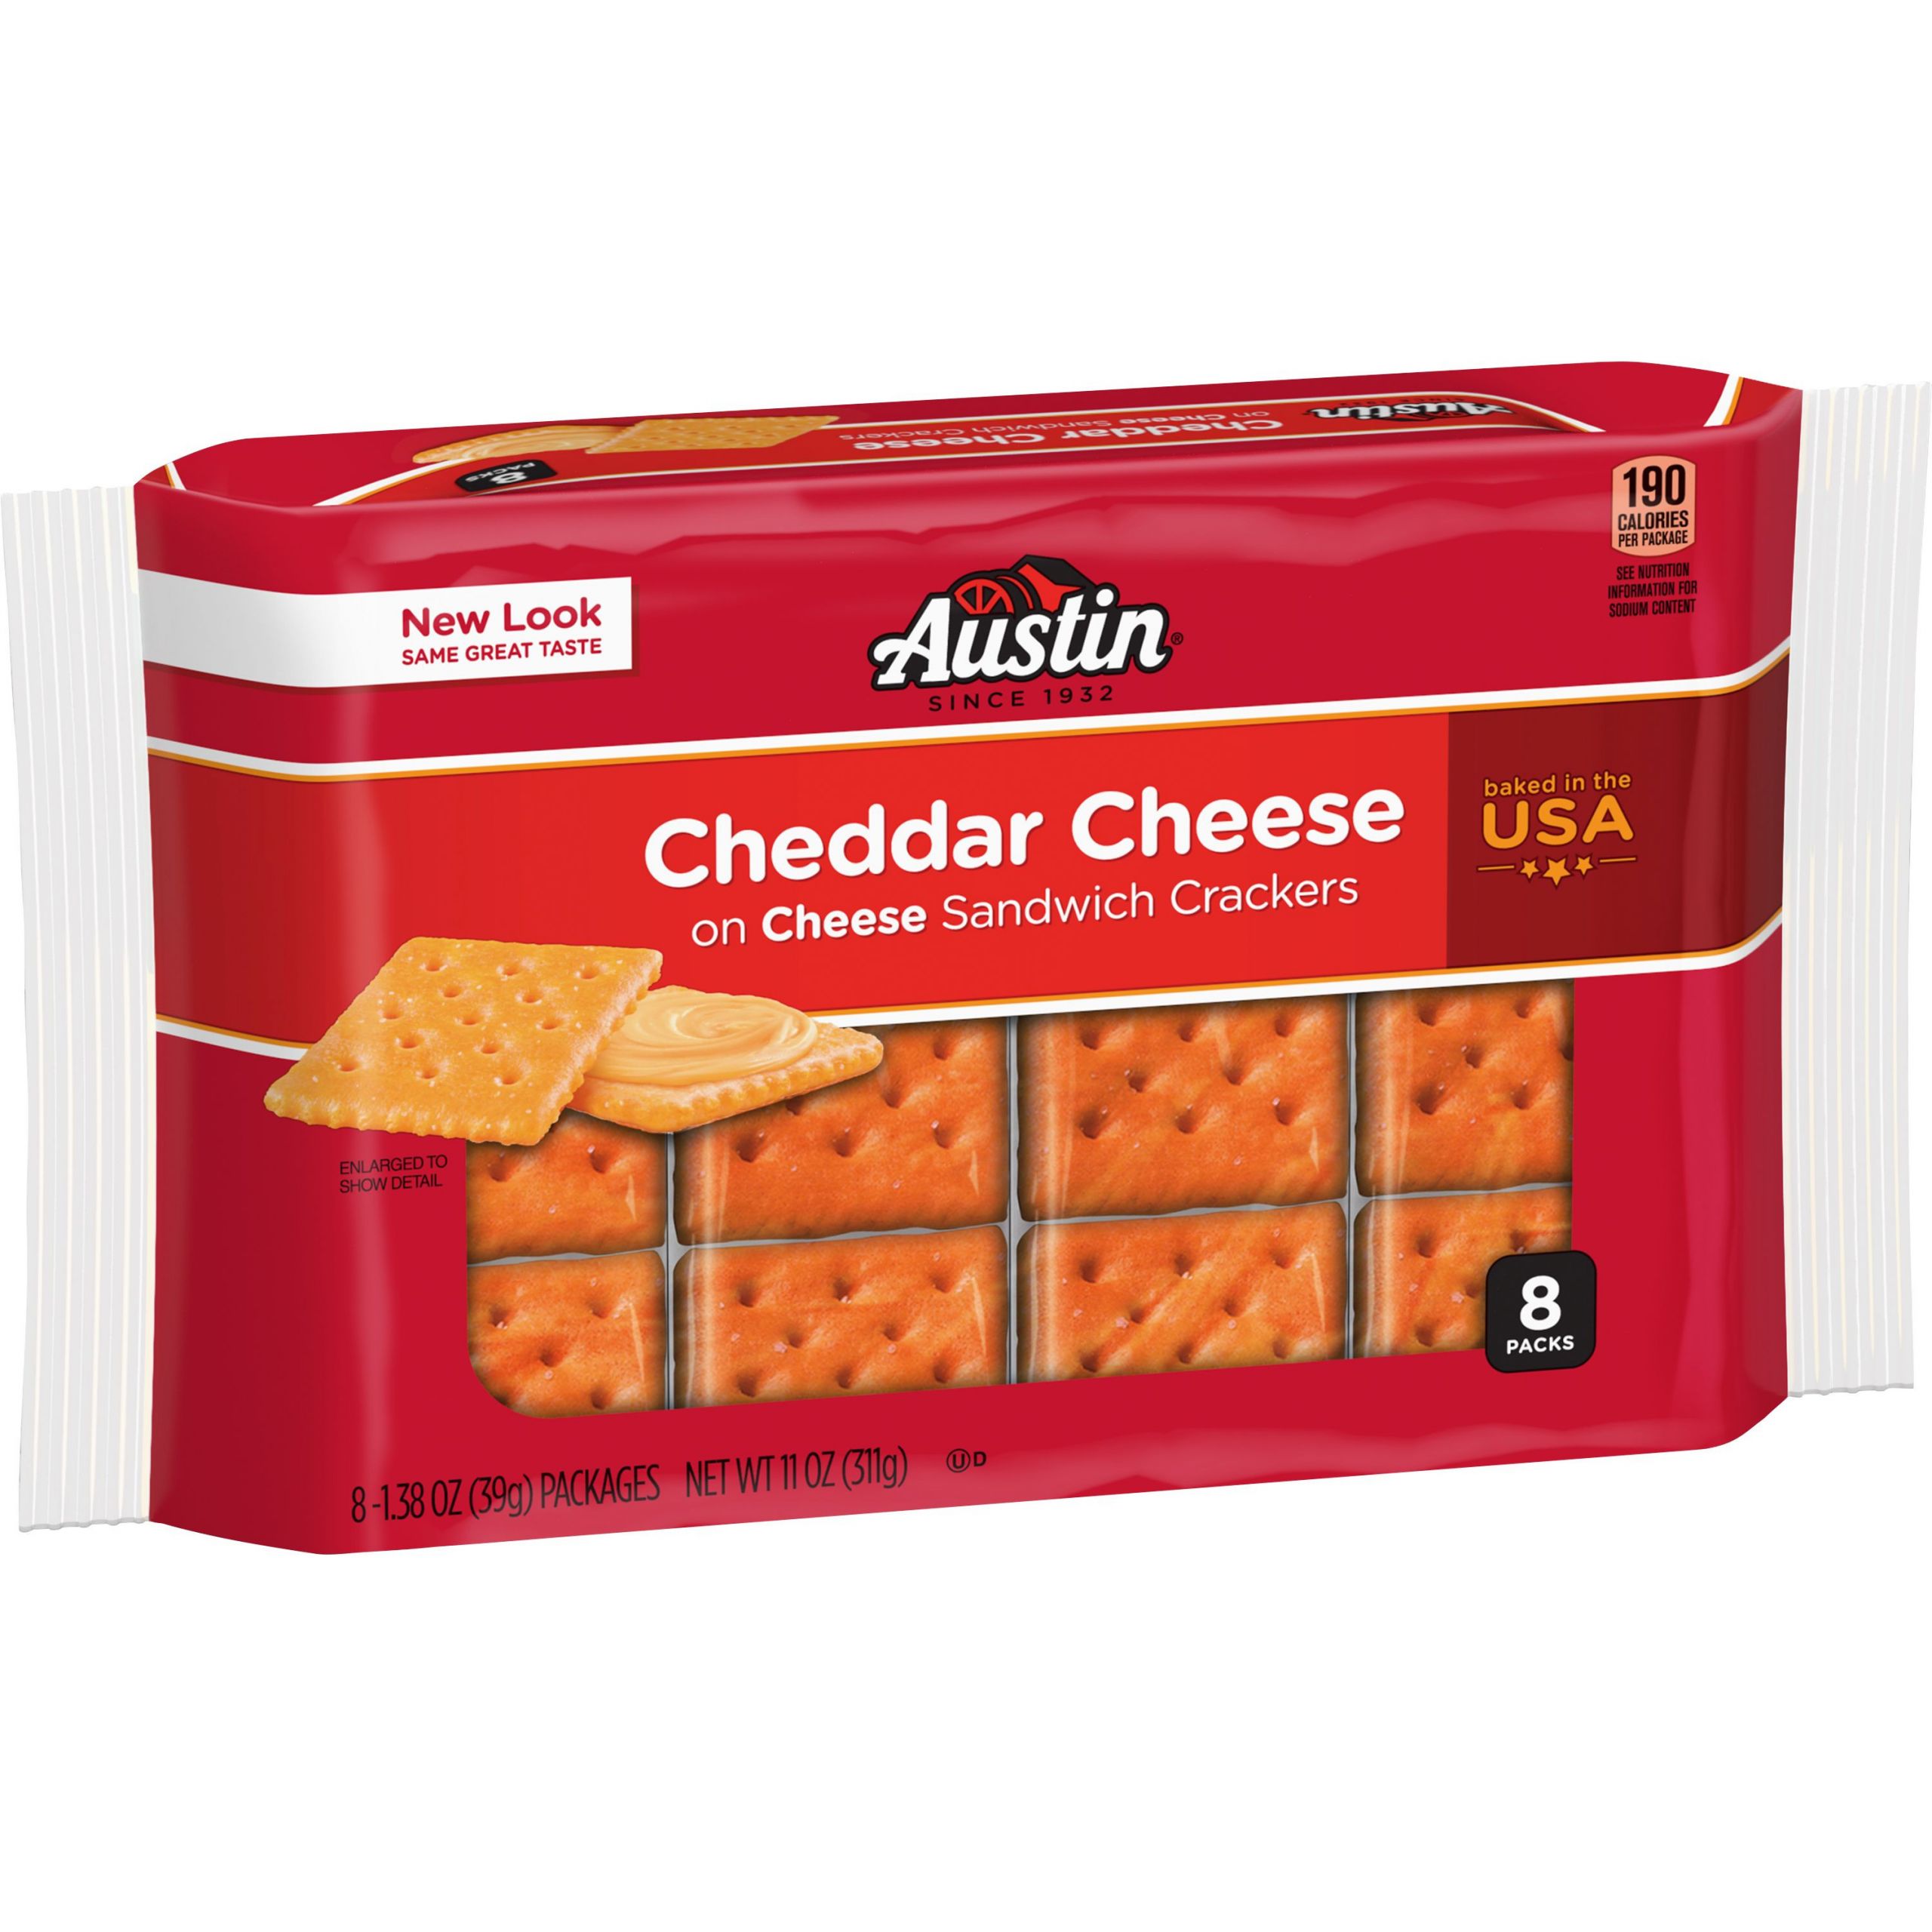 Cheddar Cheese Crackers Inspirational Austin Sandwich Crackers Cheddar Cheese On Cheese